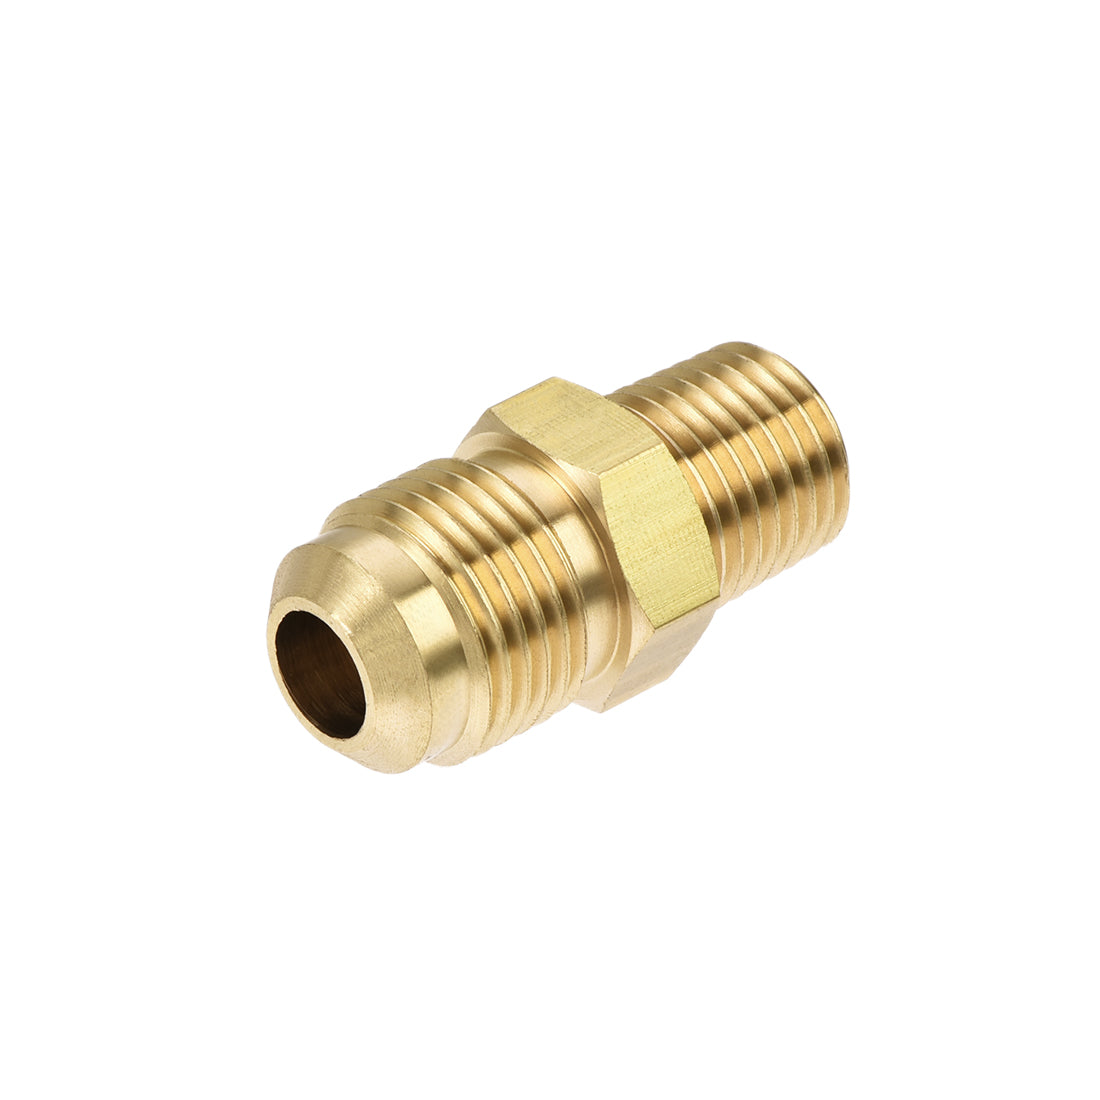 Uxcell Uxcell Brass Pipe fitting, 3/8 SAE Flare to 3/8NPT Male Thread, Tubing Adapter Hose Connector, for Air Conditioner Refrigeration, 2Pcs